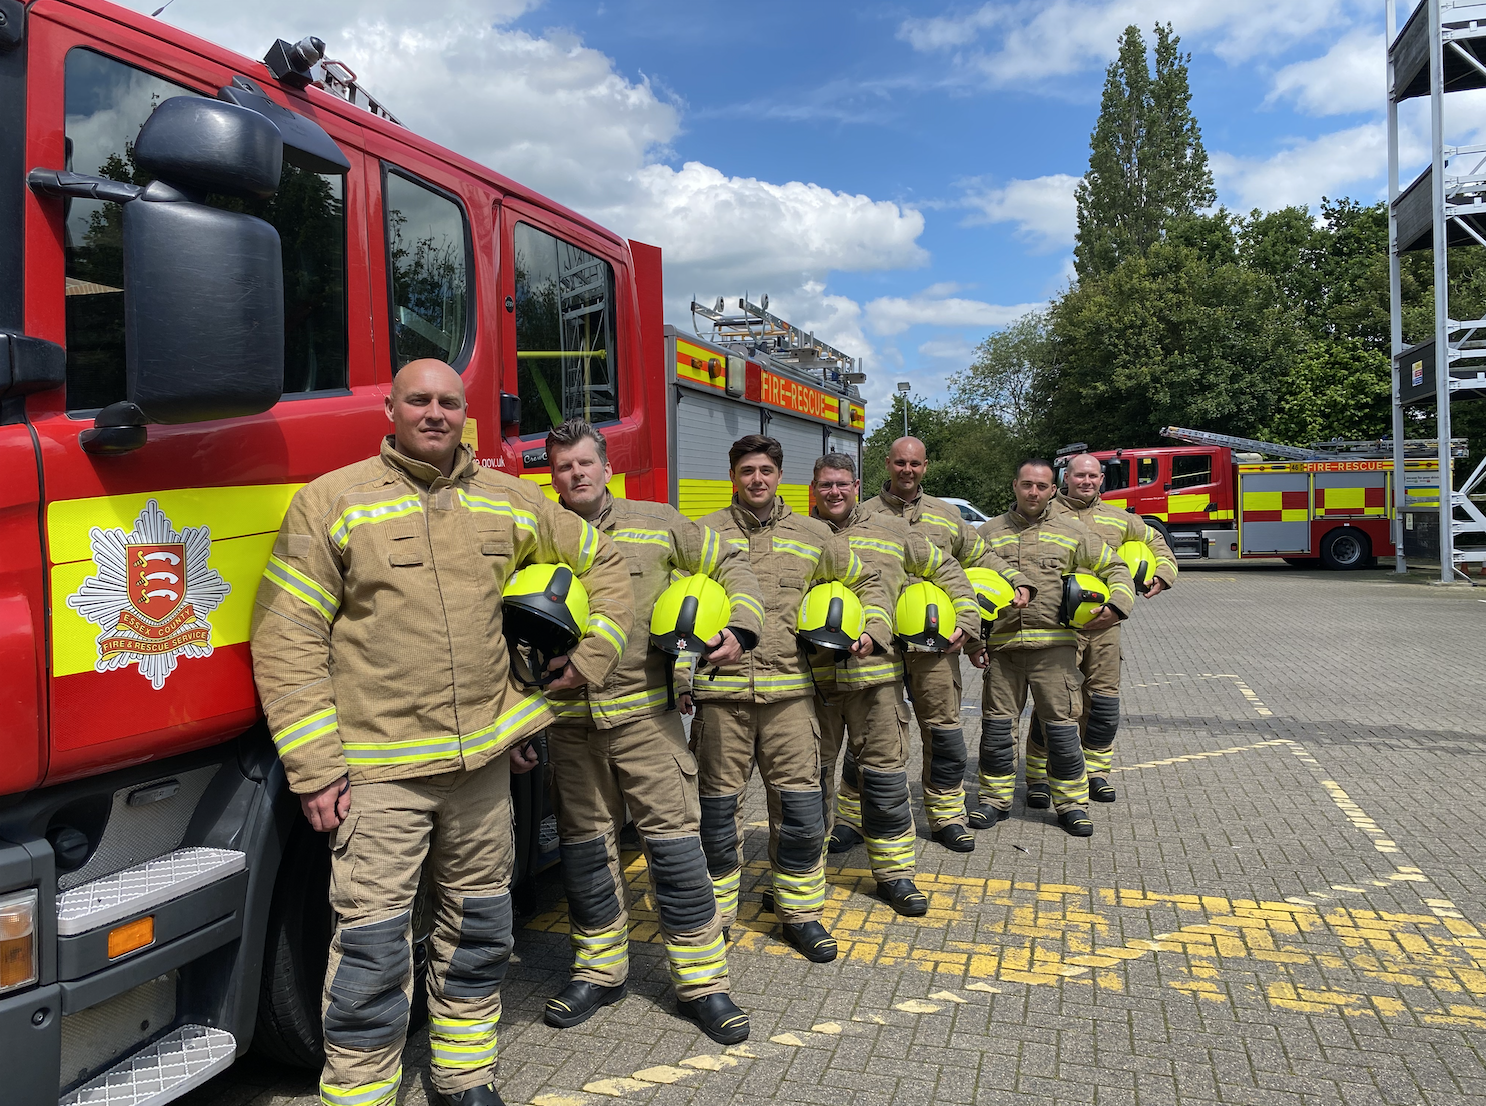 Seven new on-call firefighters complete their course at Maldon Fire Station